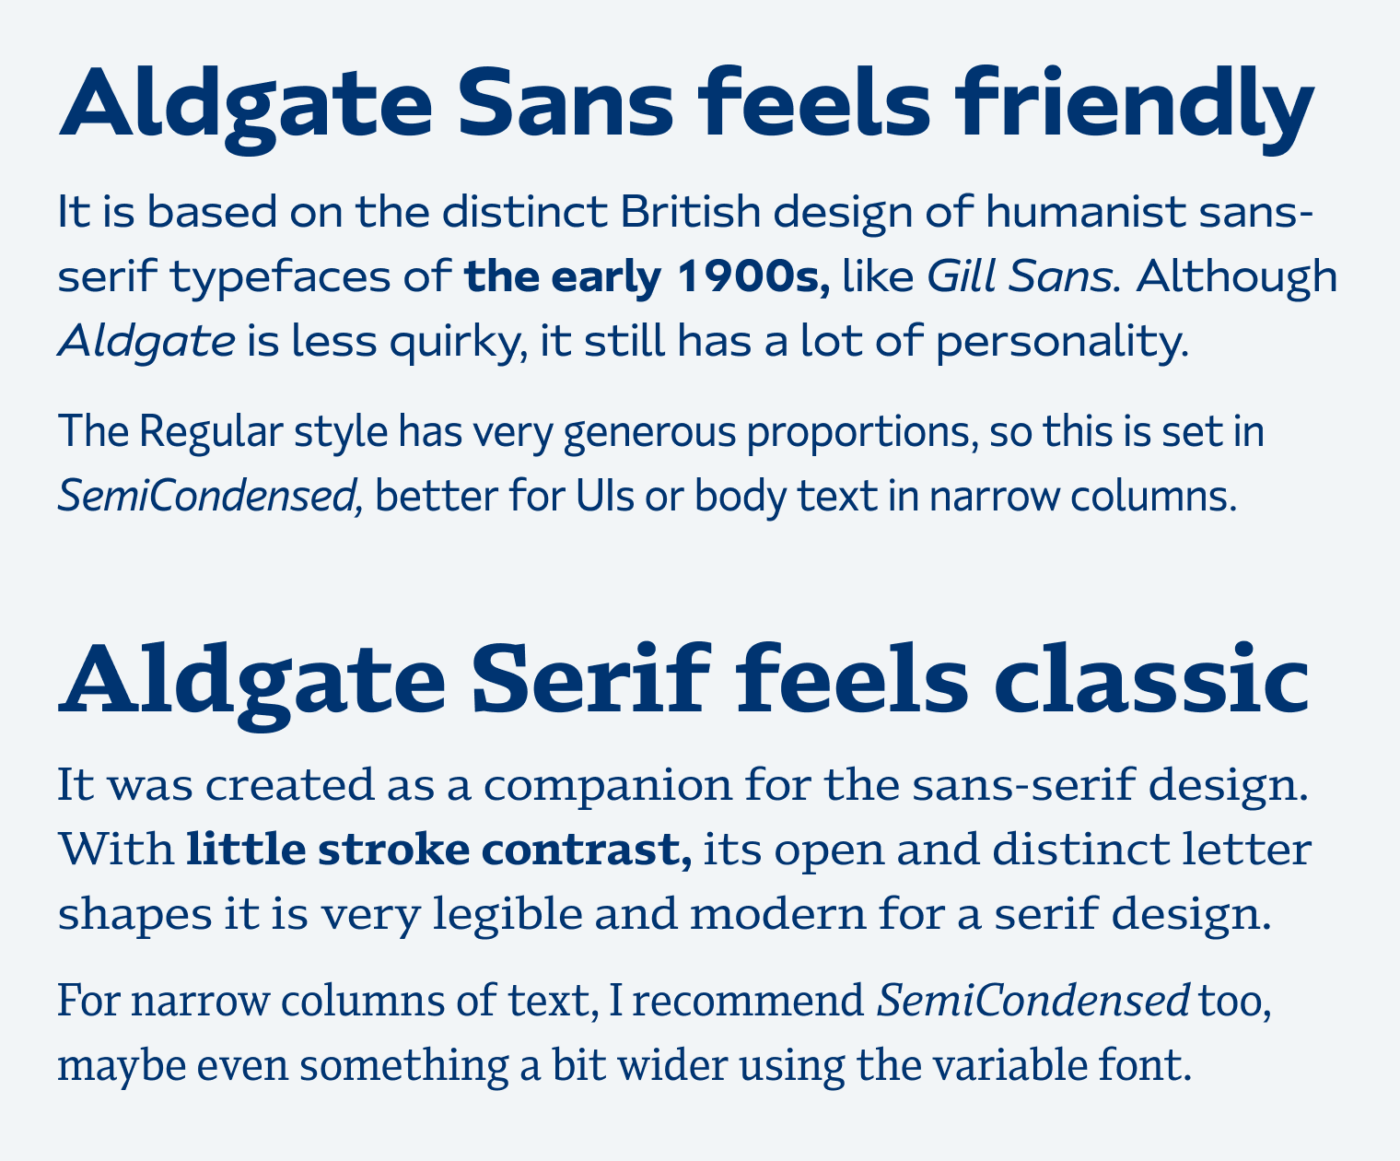 Aldgate Sans feels friendly. It is based on the distinct British design of humanist sans-serif typefaces of the early 1900s, like Gill Sans. Although Aldgate is less quirky, it still has a lot of personality. The Regular style has very generous proportions, so this is set in Semi Condensed, ideal for UI design or body text in narrow columns. Aldgate Serif feels classic. It was created as a companion for the sans-serif design. With little stroke contrast, its open and distinct letter shapes it is very legible and modern for a serif design. For narrow columns of text, I recommend SemiCondensed too, maybe even something a bit wider using the variable font.